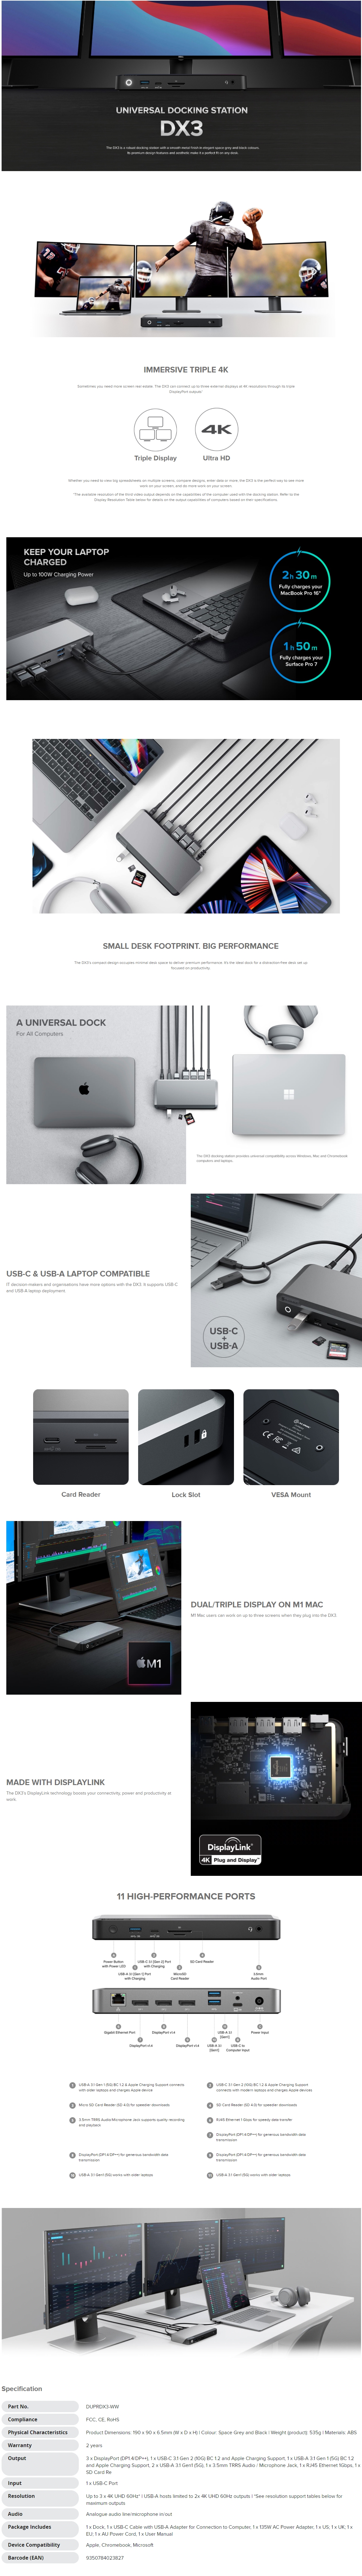 A large marketing image providing additional information about the product ALOGIC 4K Display Universal Docking Station - 100W Power Delivery - Additional alt info not provided